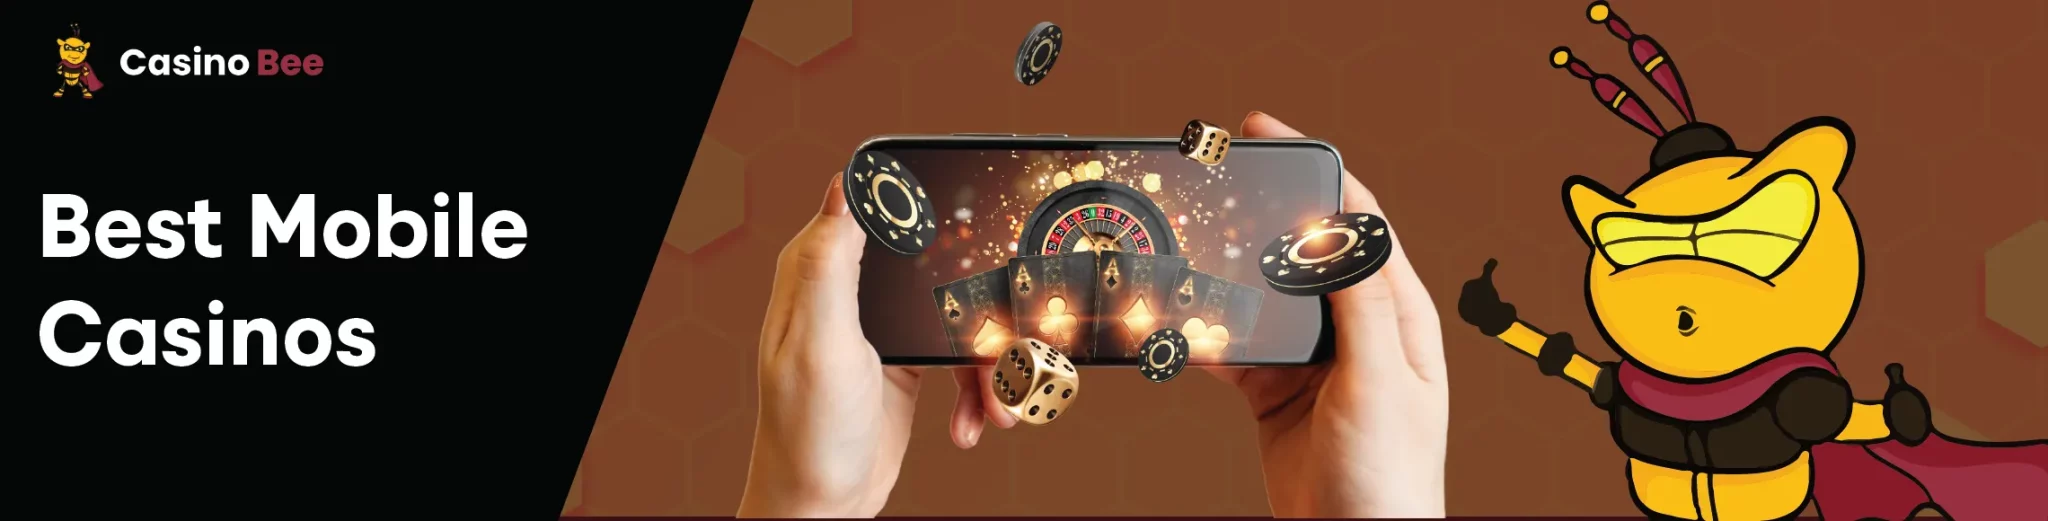 Discover the Best Mobile Casinos